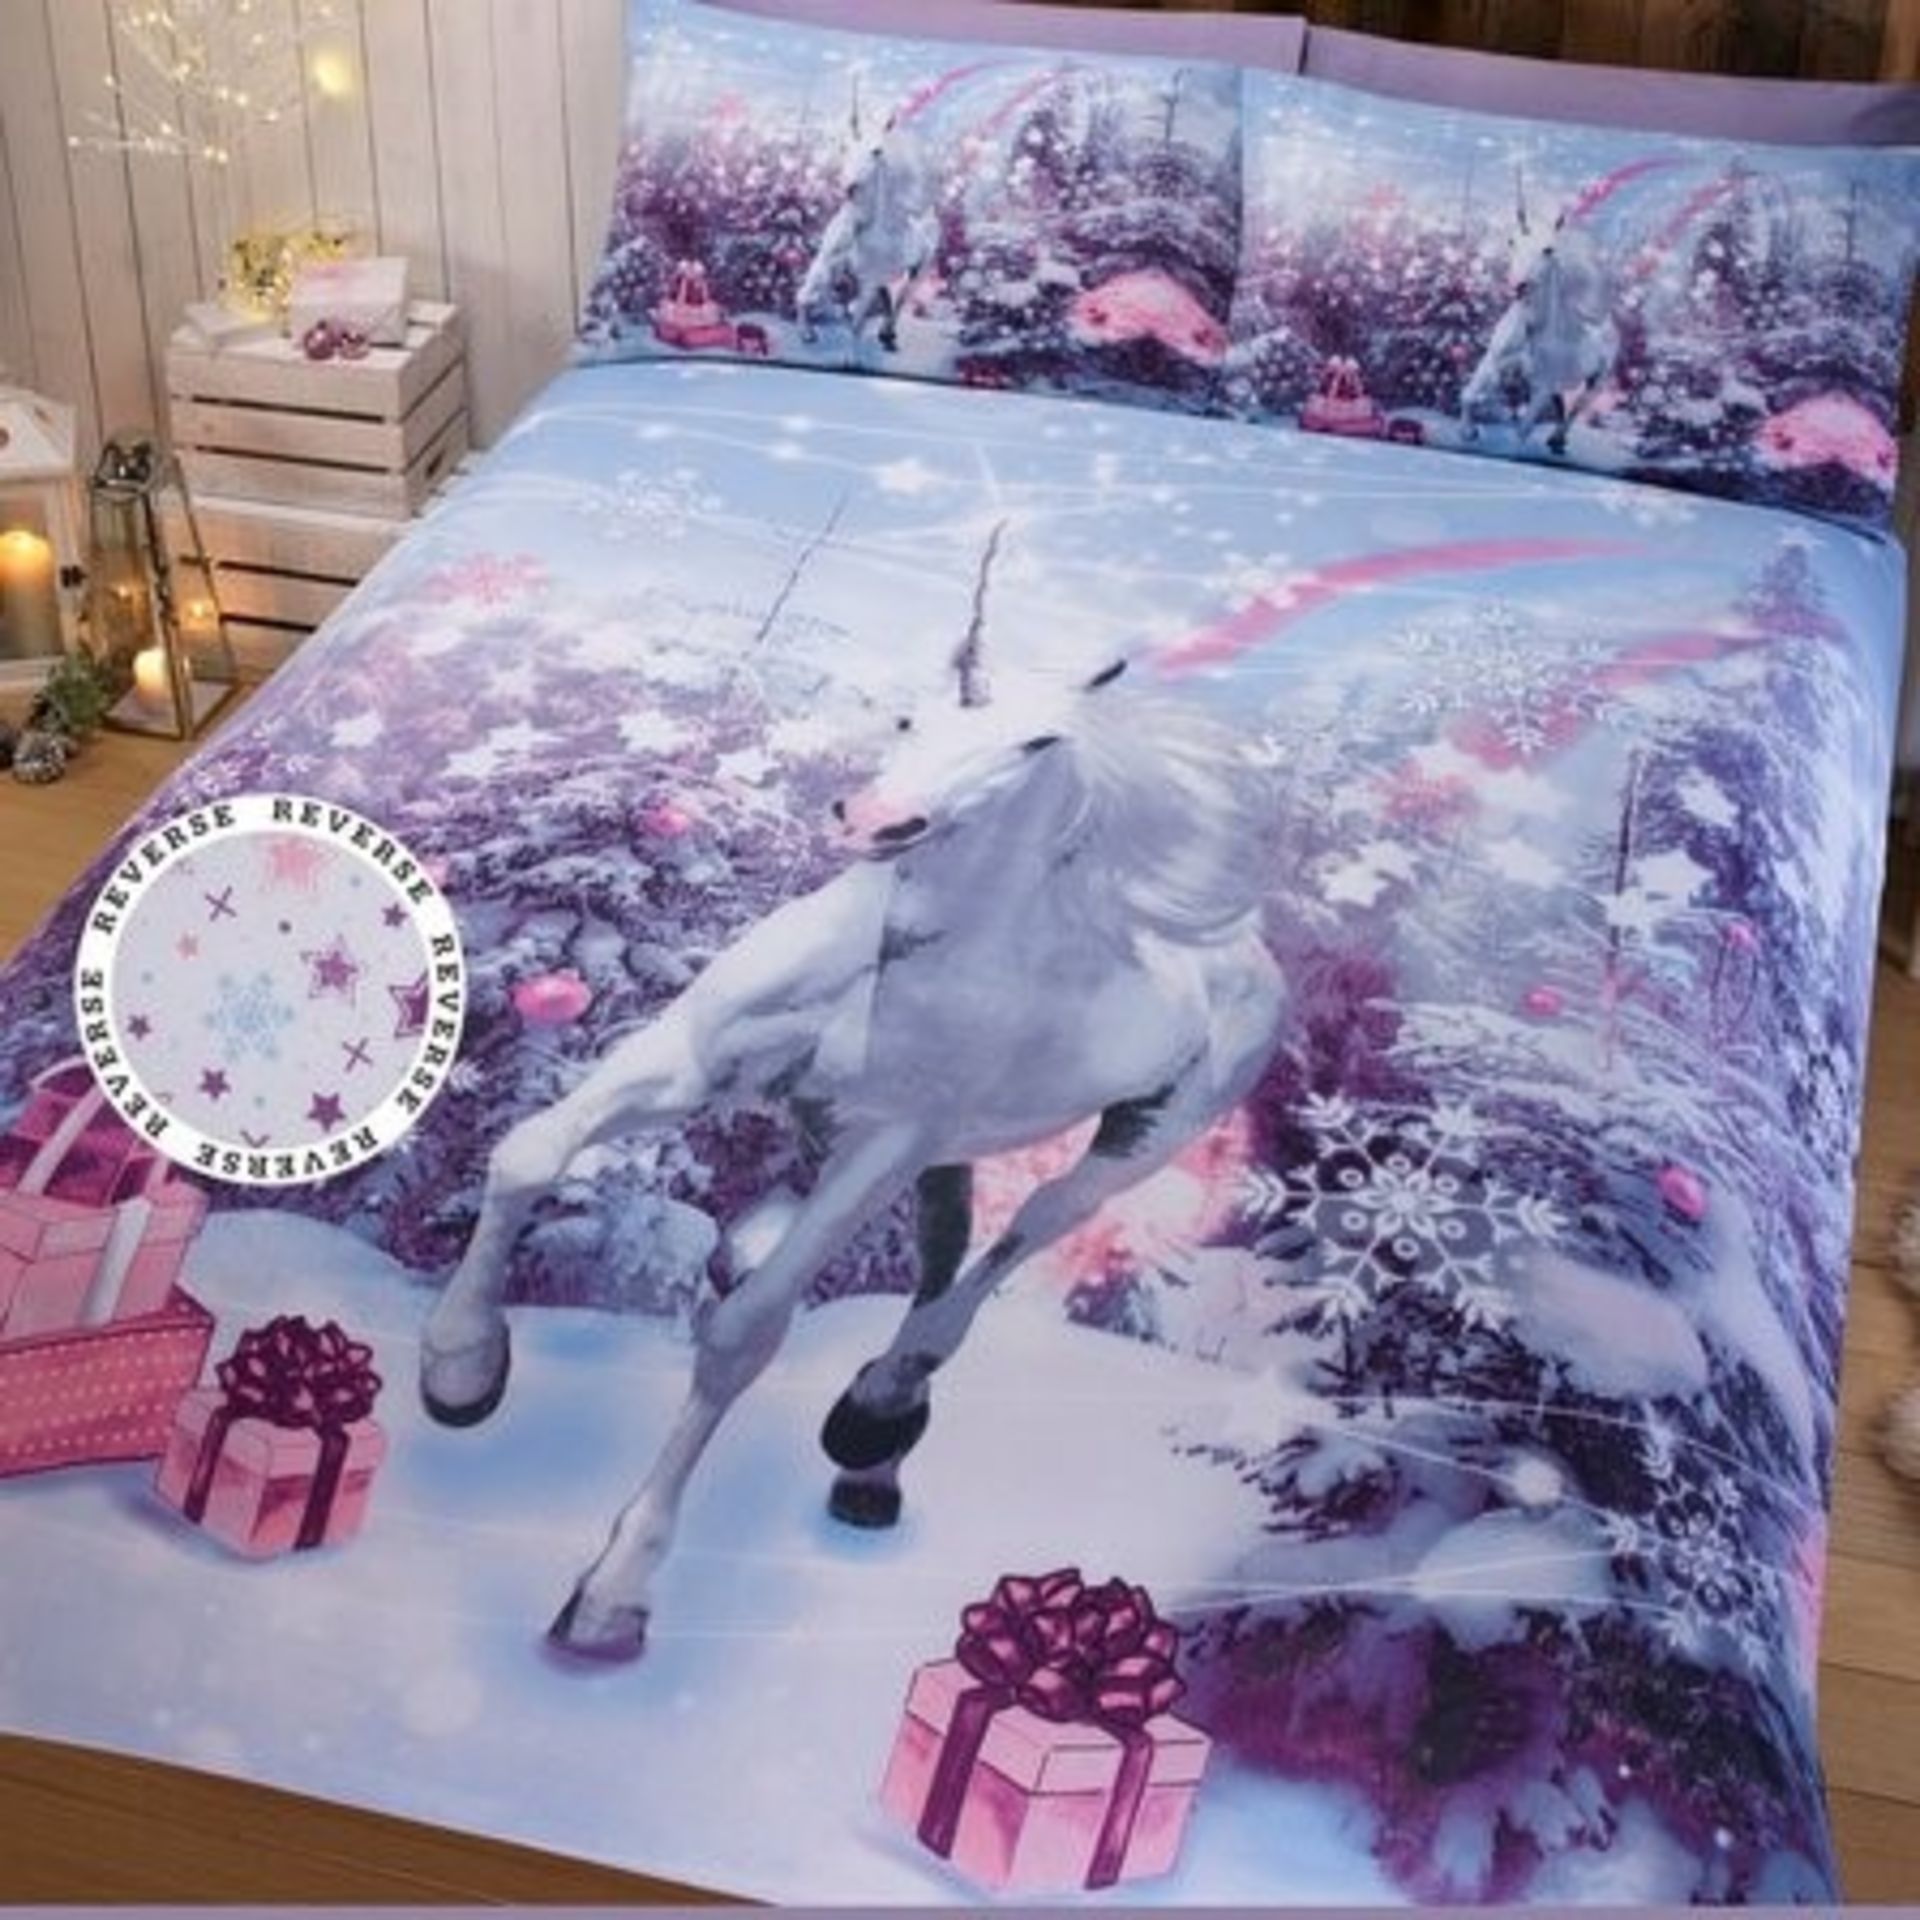 1 PACKAGED UNICORN SINGLE DUVET SET (VIEWING HIGHLY RECOMMENDED)